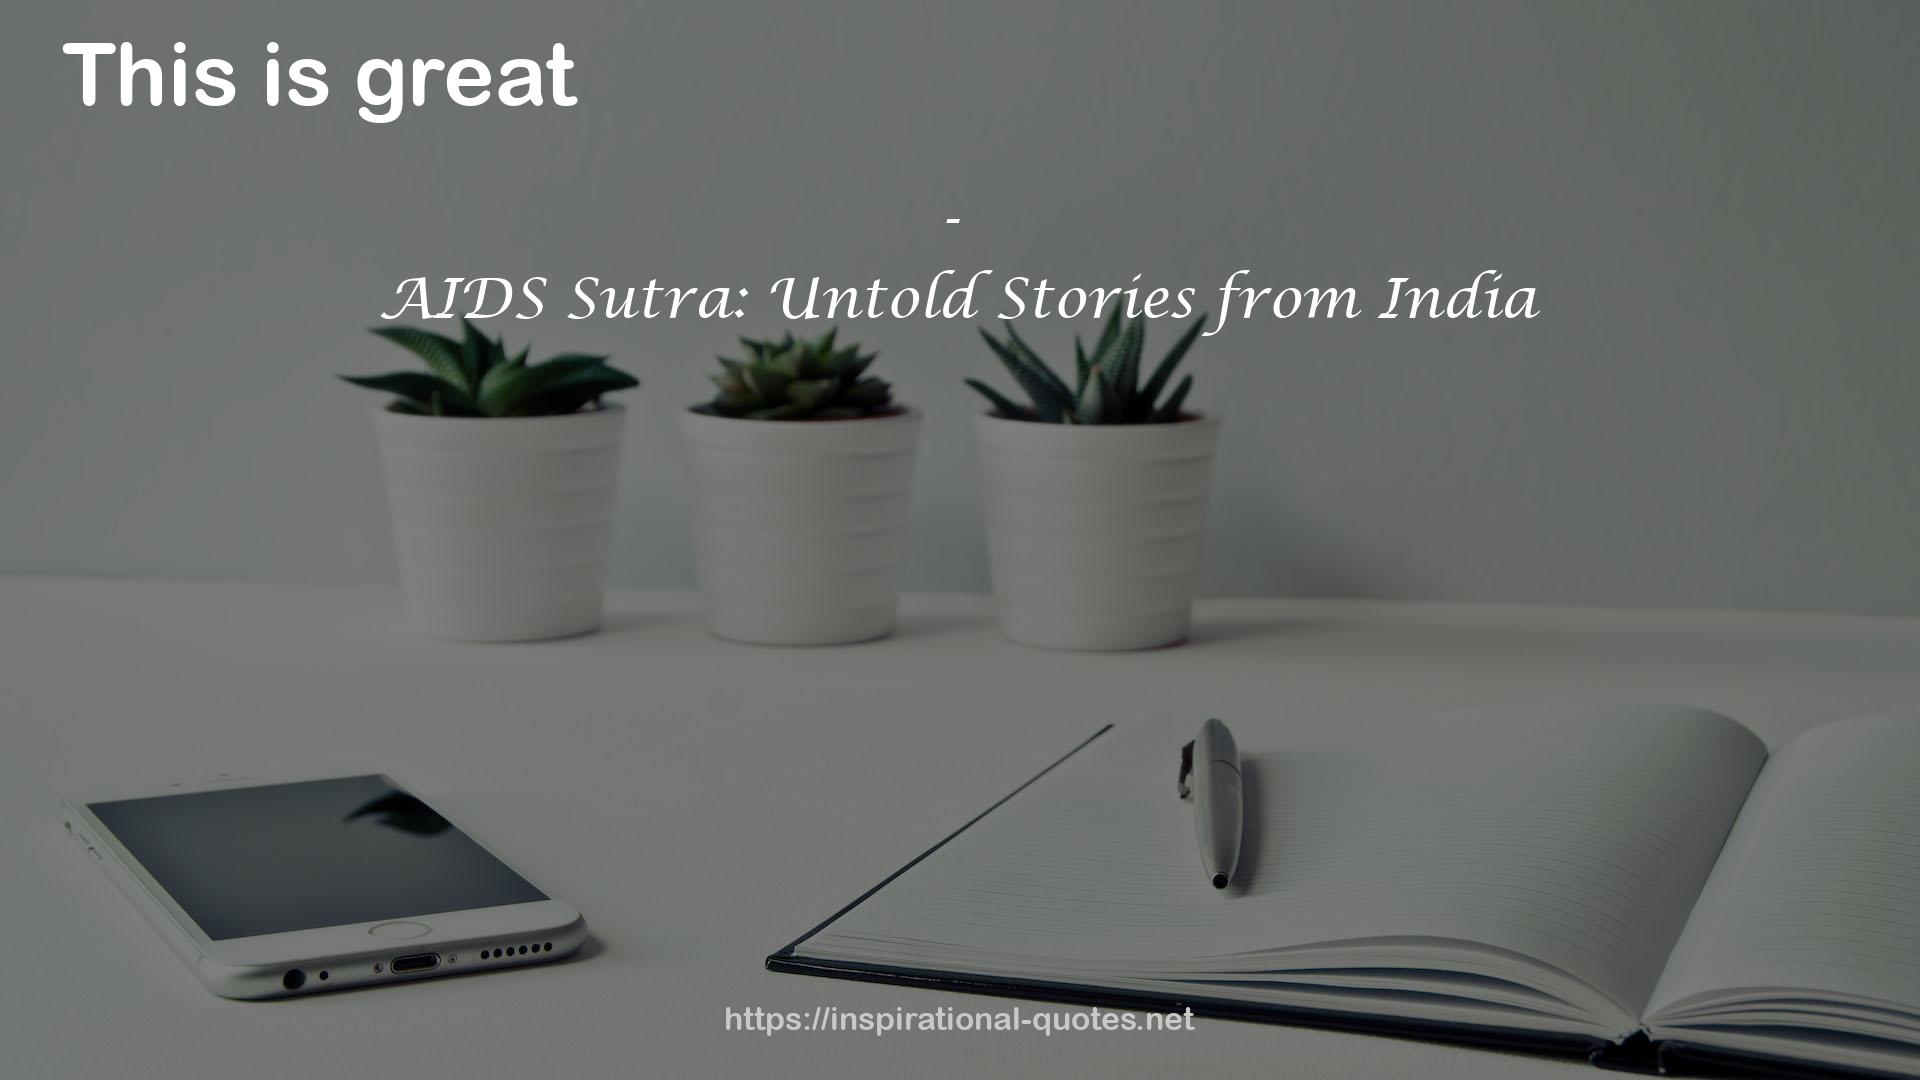 AIDS Sutra: Untold Stories from India QUOTES